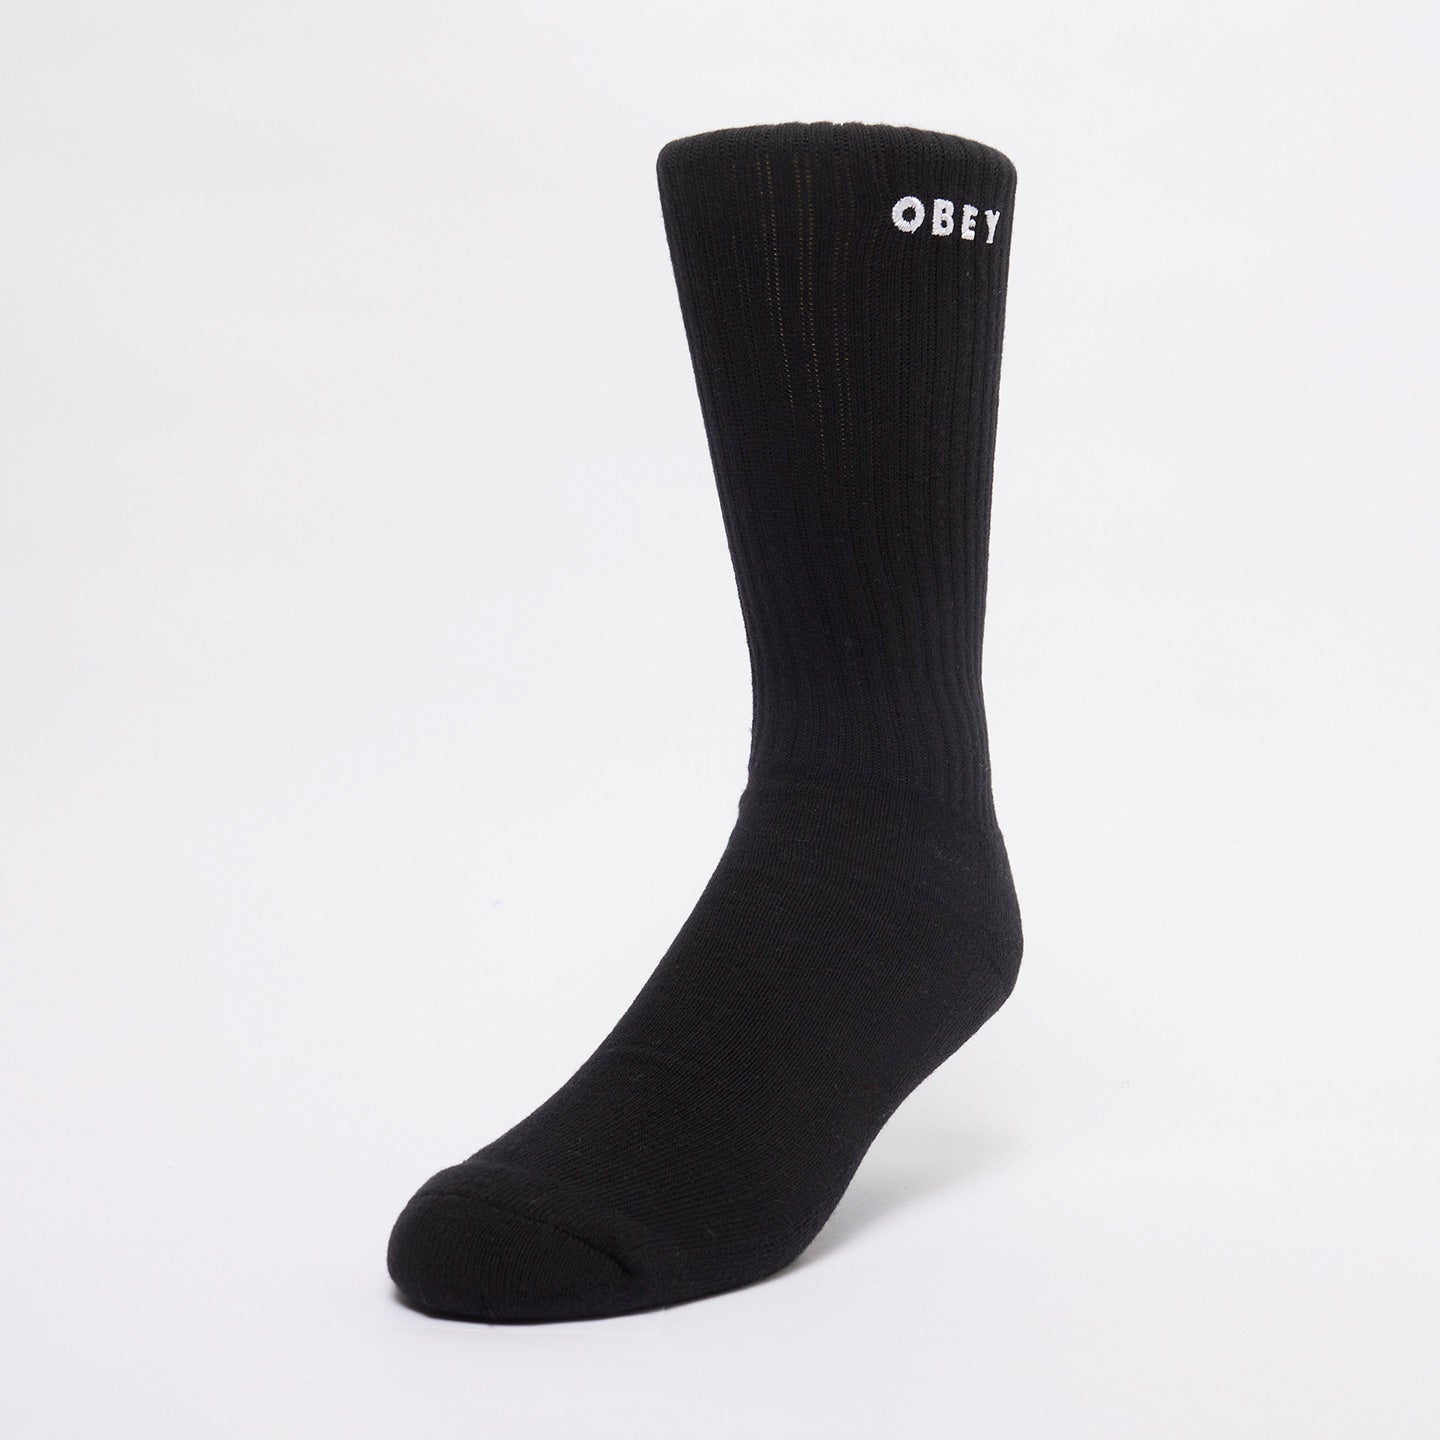 CHAUSSETTES BOLD SOCKS OBEY